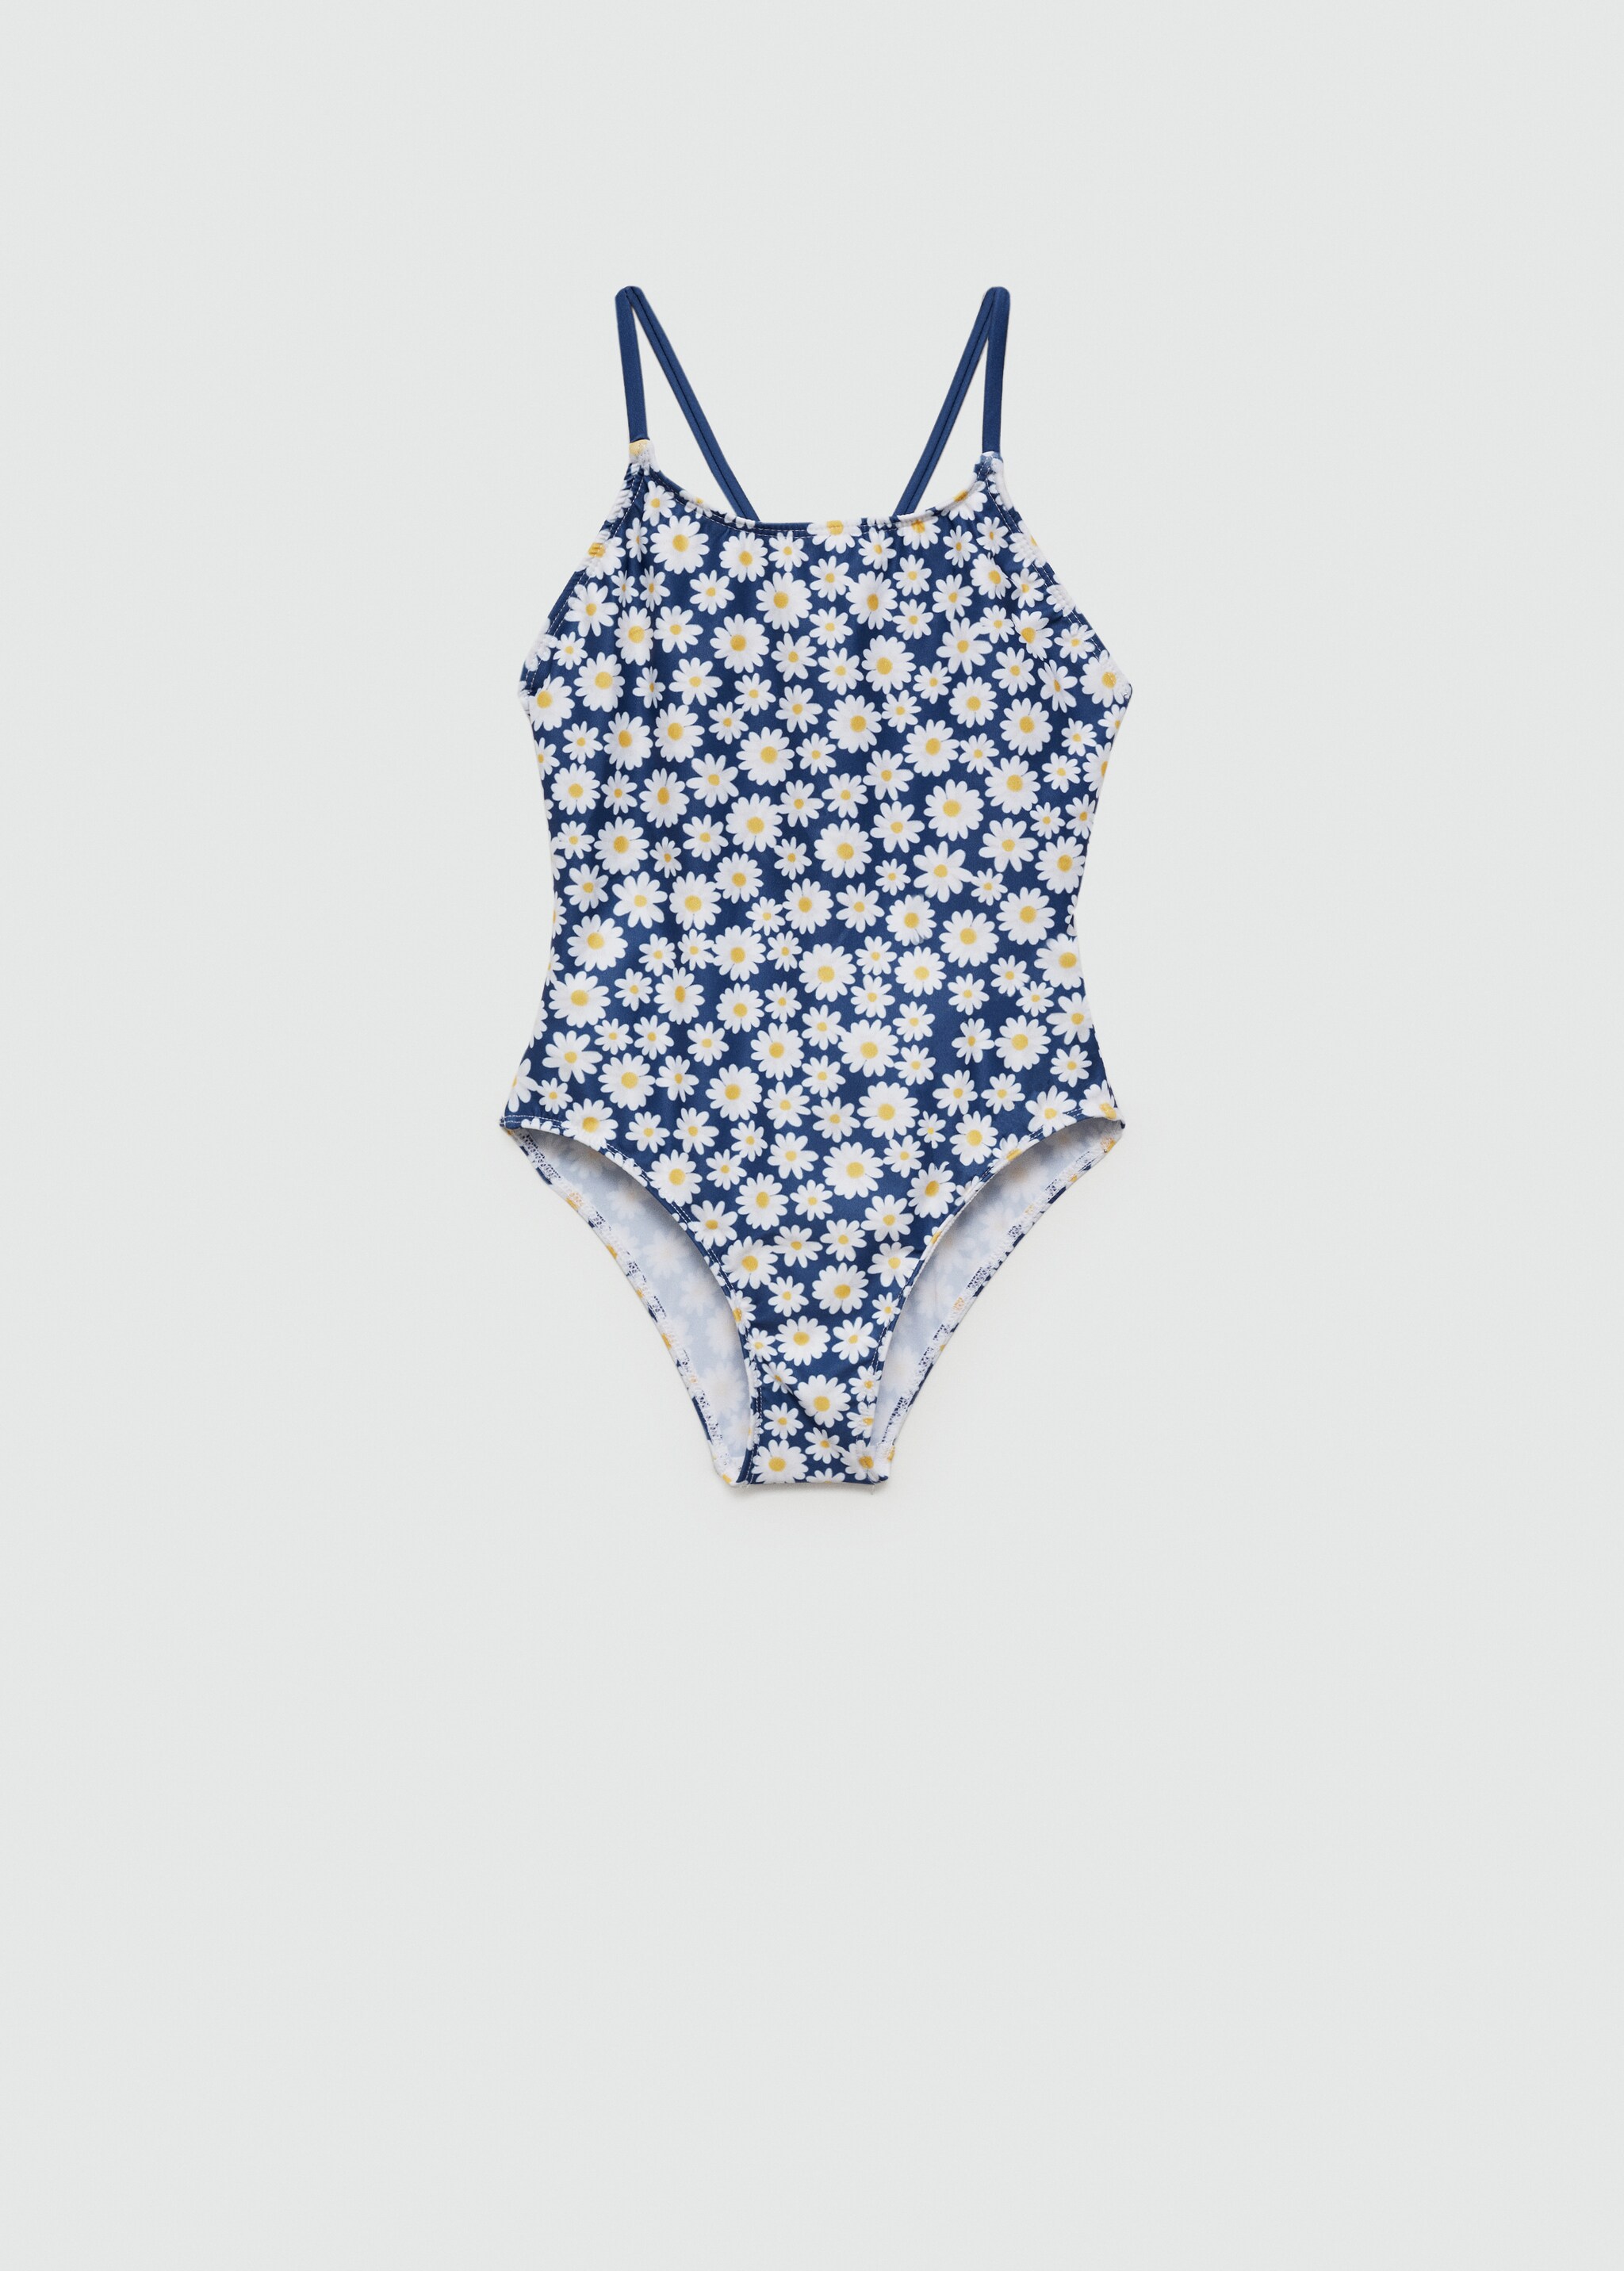 Daisy-print swimsuit - Article without model